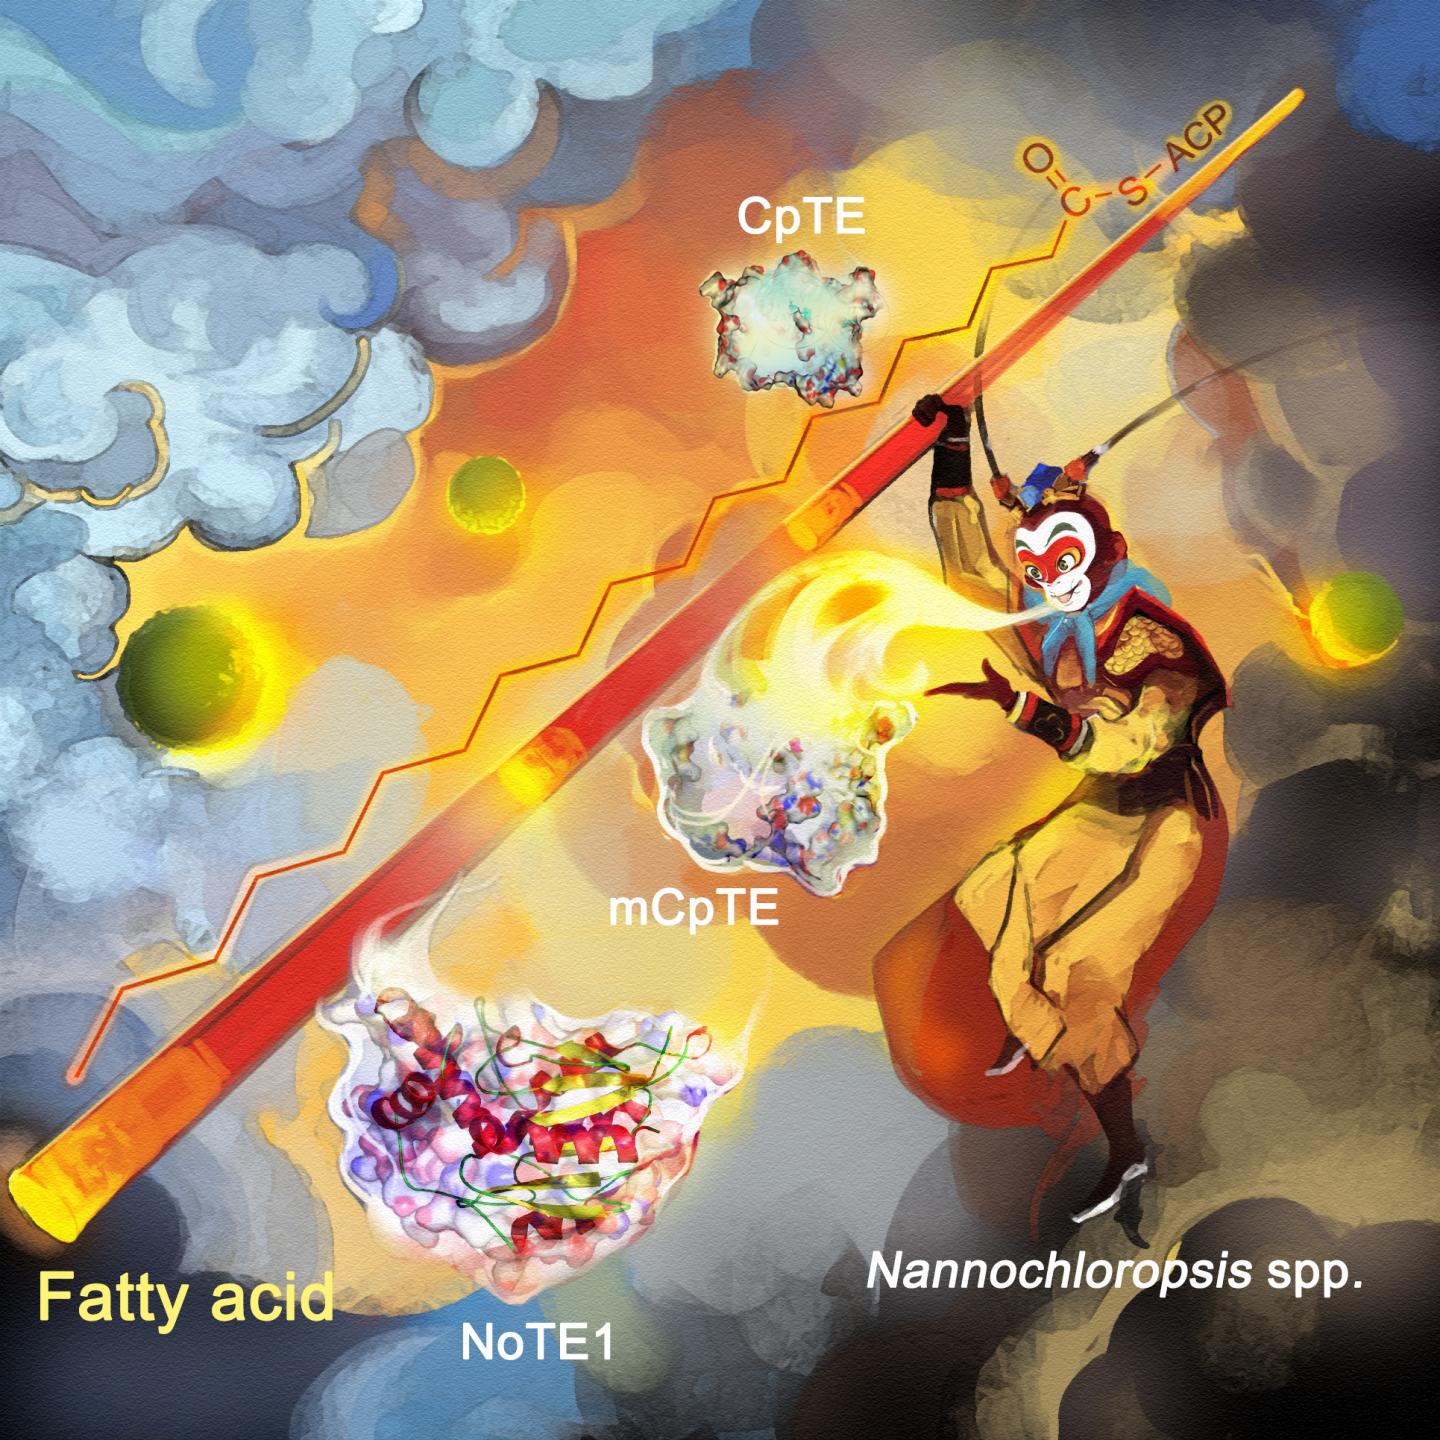 Length of fatty acid molecules can be tuned at will, just like the golden cudgel of Monkey King